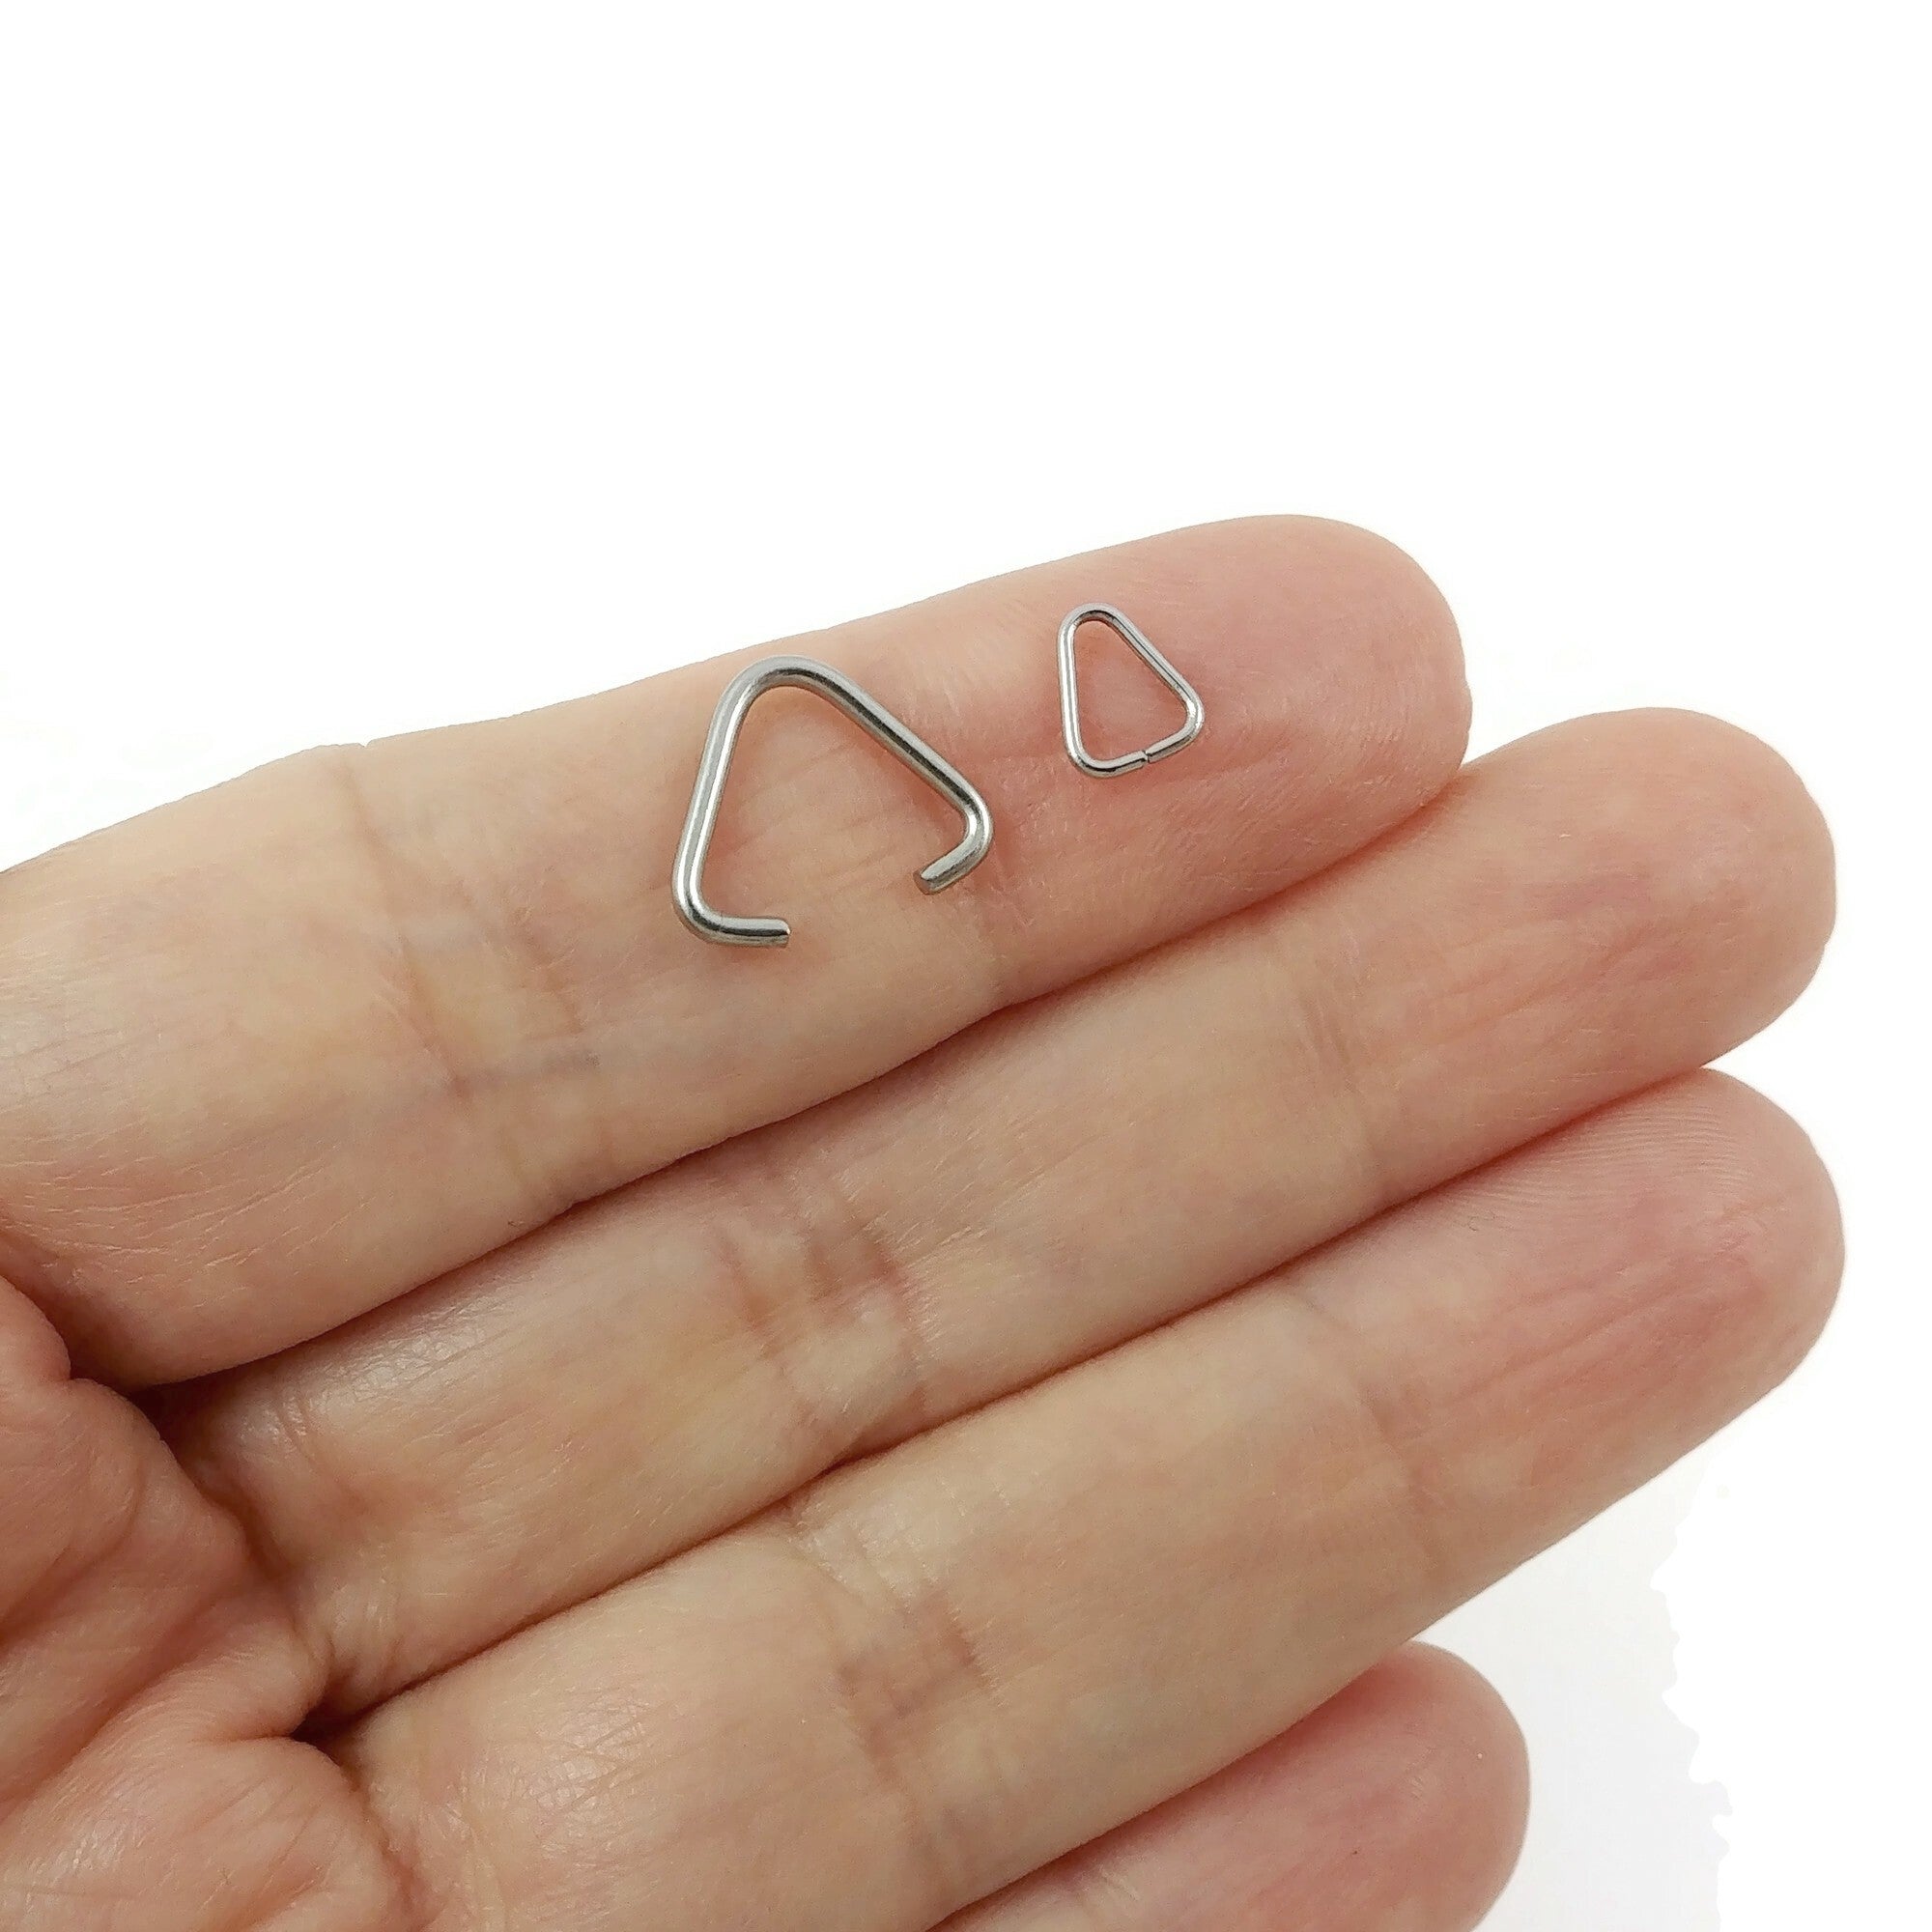 Stainless steel triangle jump rings - Silver pinch bails